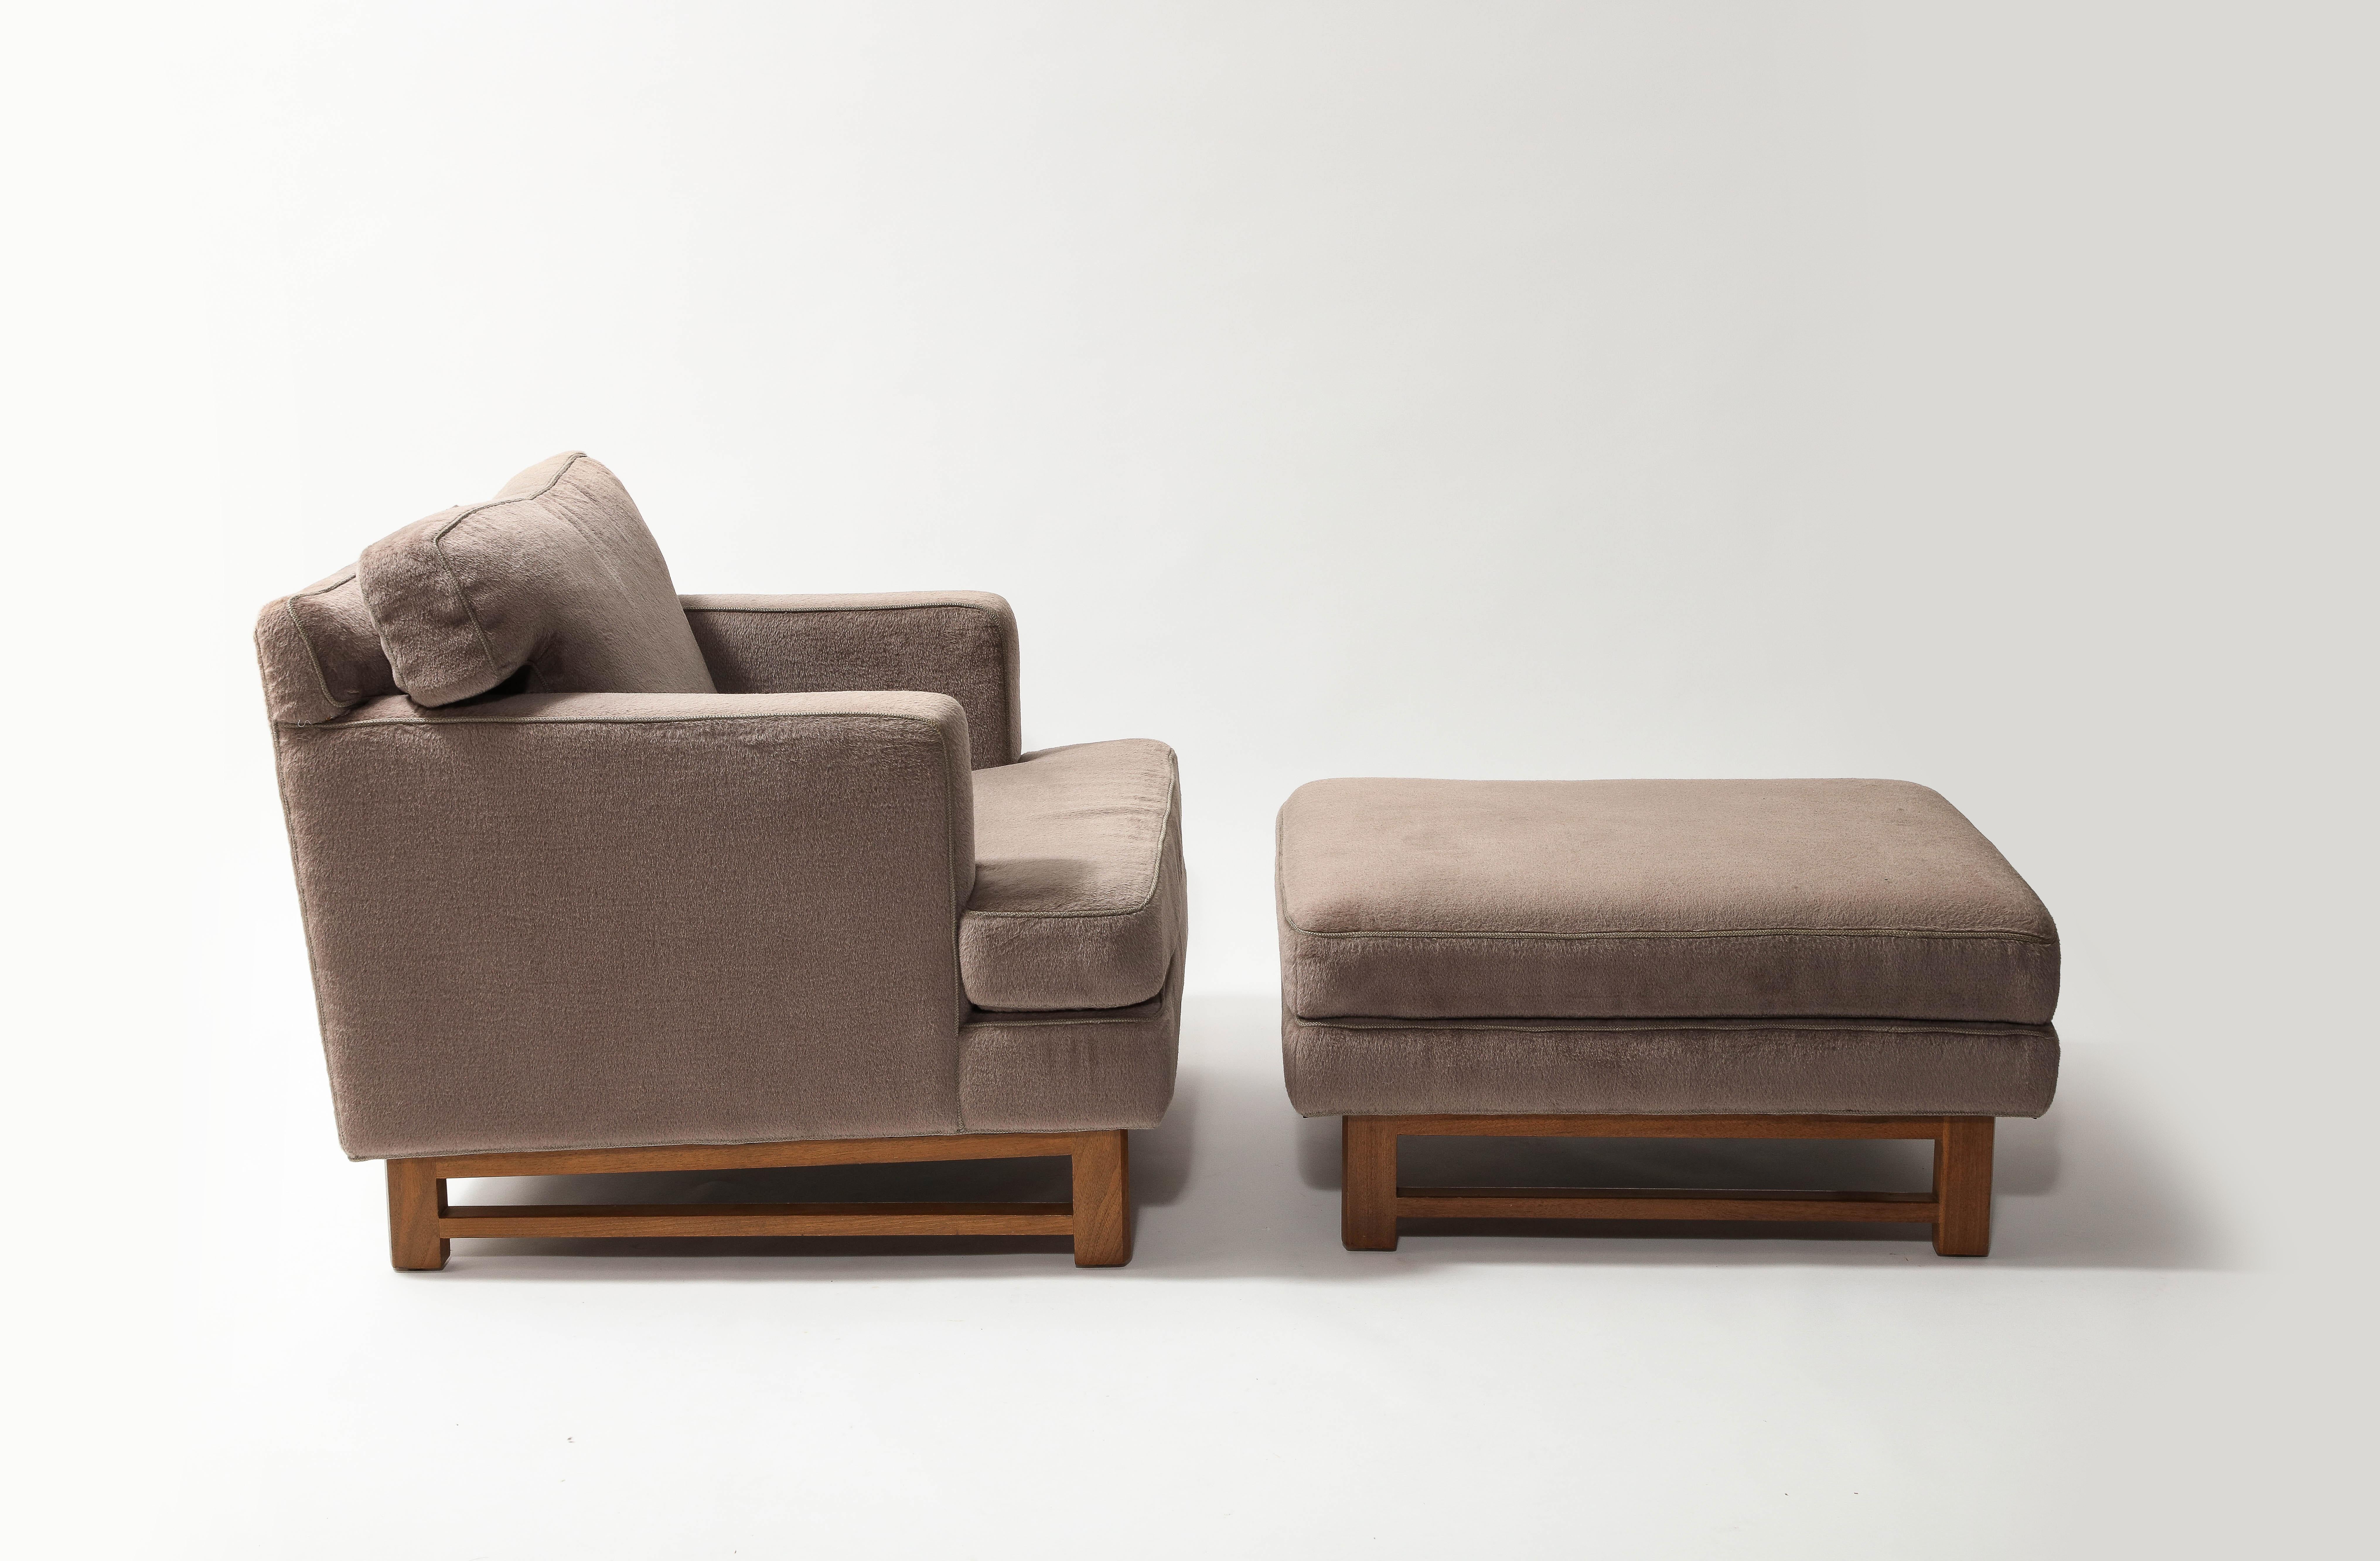 Classic lounge chair and ottoman by Wormley for Dunbar. Wood framed bases. 